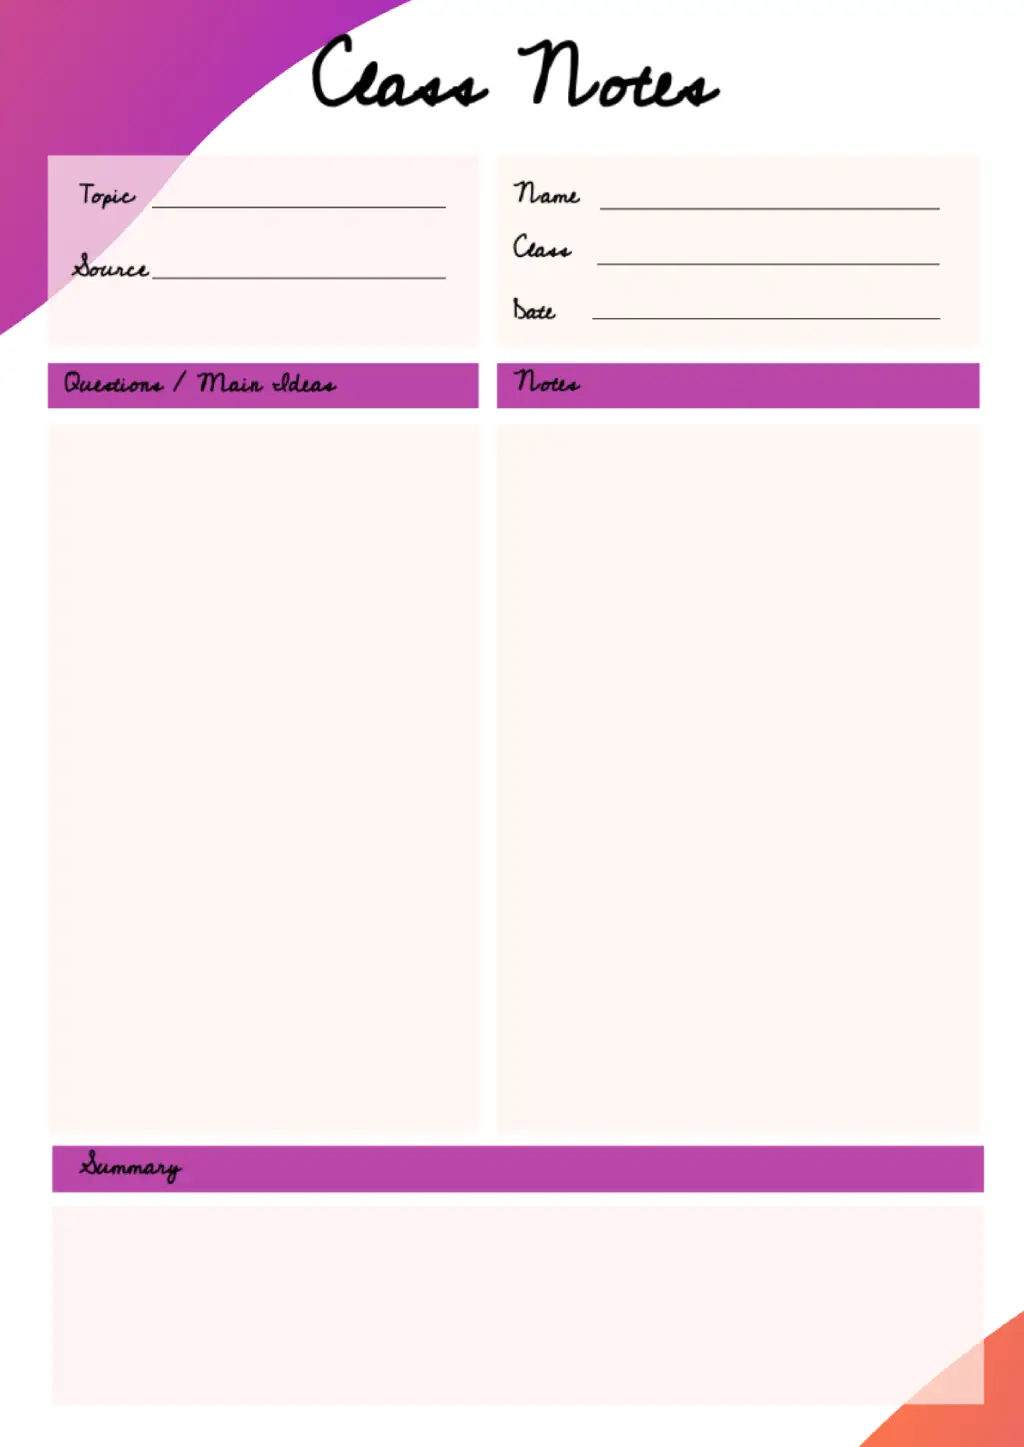 Class Notes Template for Google Docs